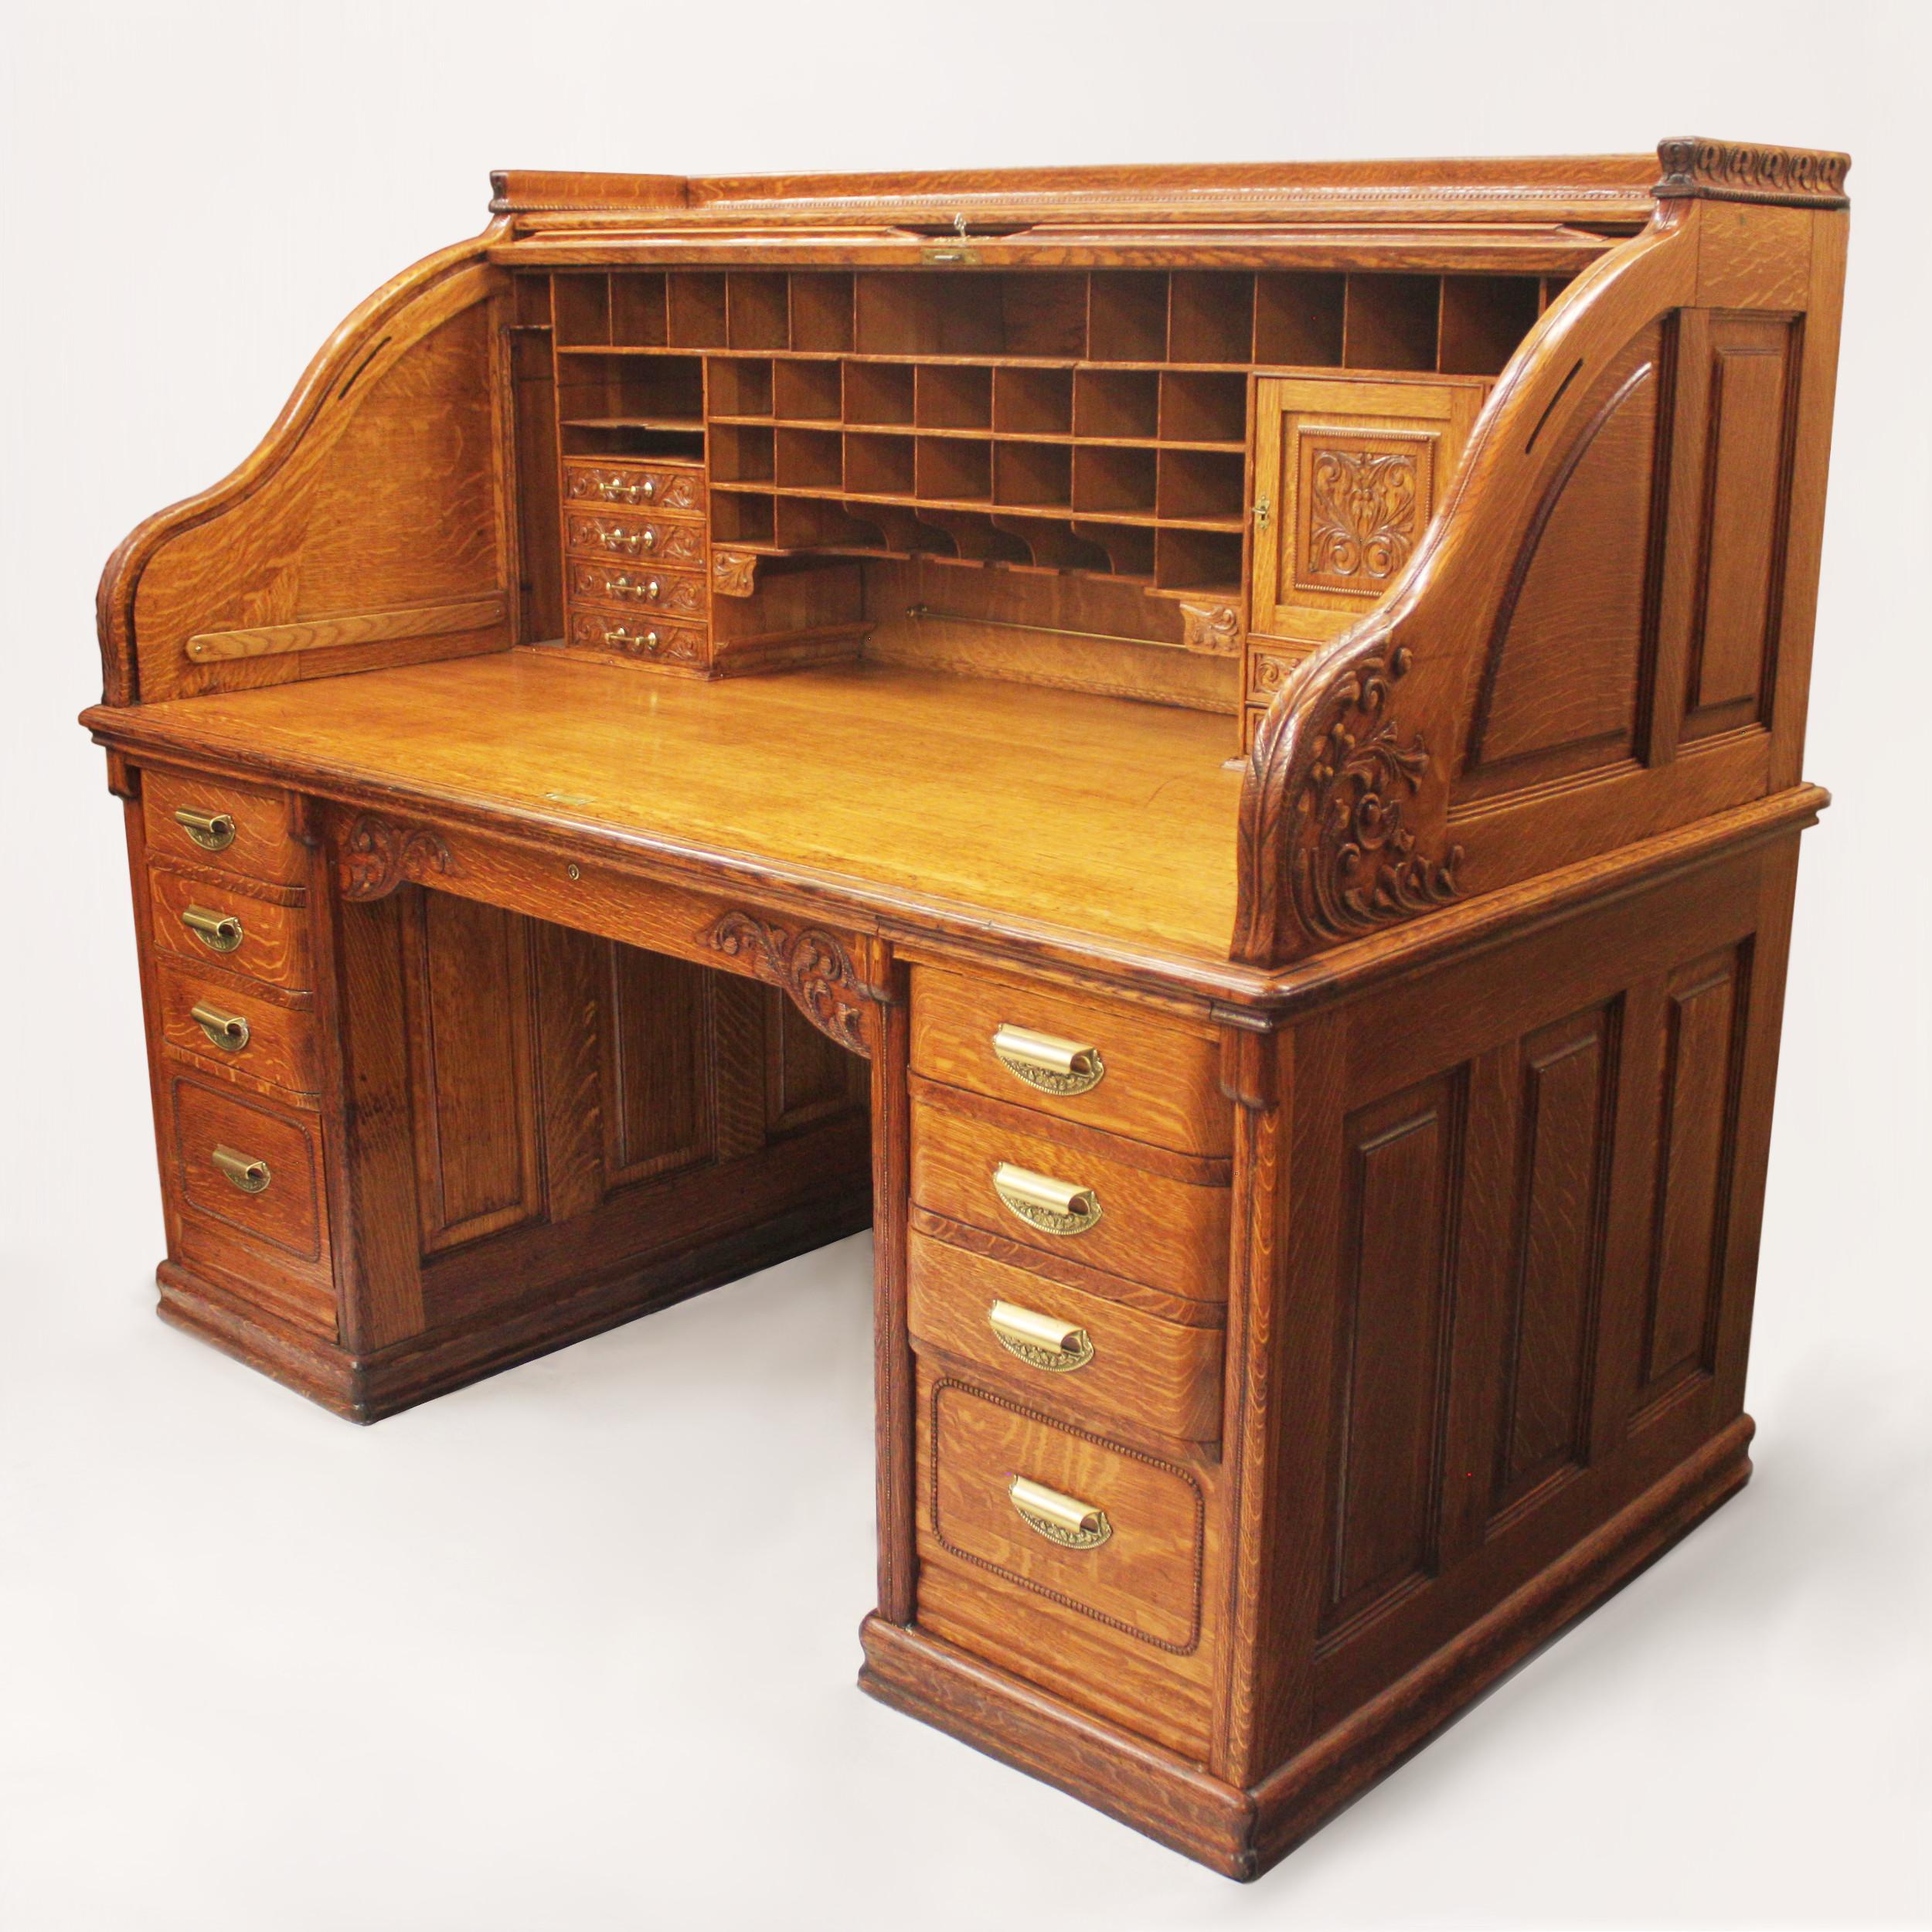 This phenomenal roll top desk was made by the A. Petersen & Co. of Chicago, IL some time in the early to mid-1890s. We discovered this desk in the maintenance room of the historic Humphrey Scottish Rite Center in downtown Milwaukee, WI, in need of